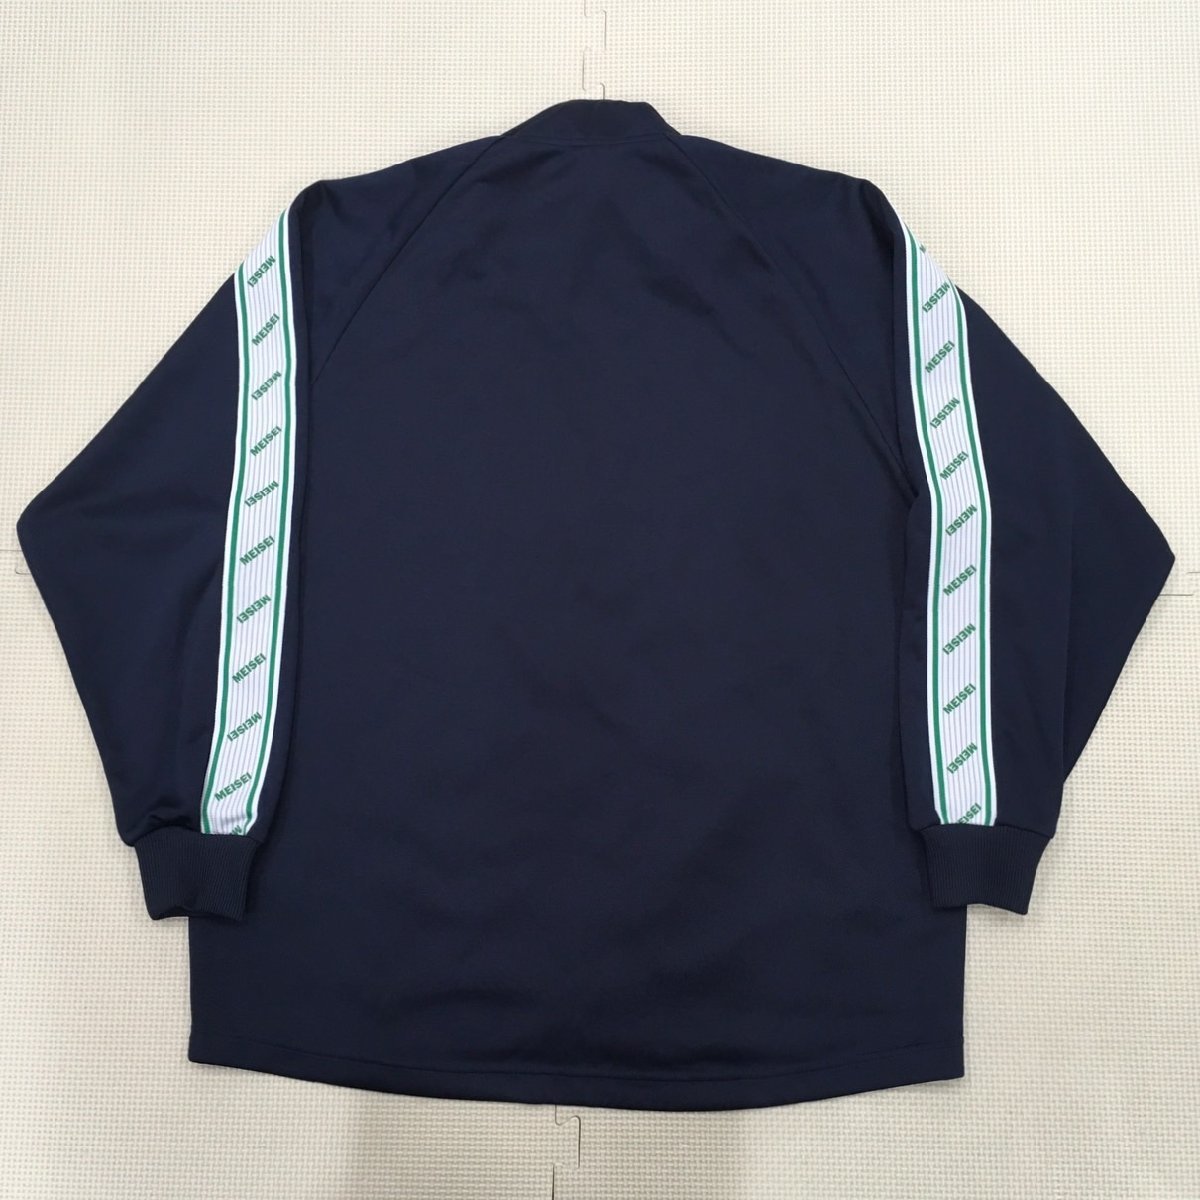 A295/S997 ( used ) Tokyo Metropolitan area private shining star junior high school gym uniform 1 point /S/ long sleeve /UNITIKA MATE/ navy blue / white × green / short period put on supplies / gym uniform / jersey / motion put on 